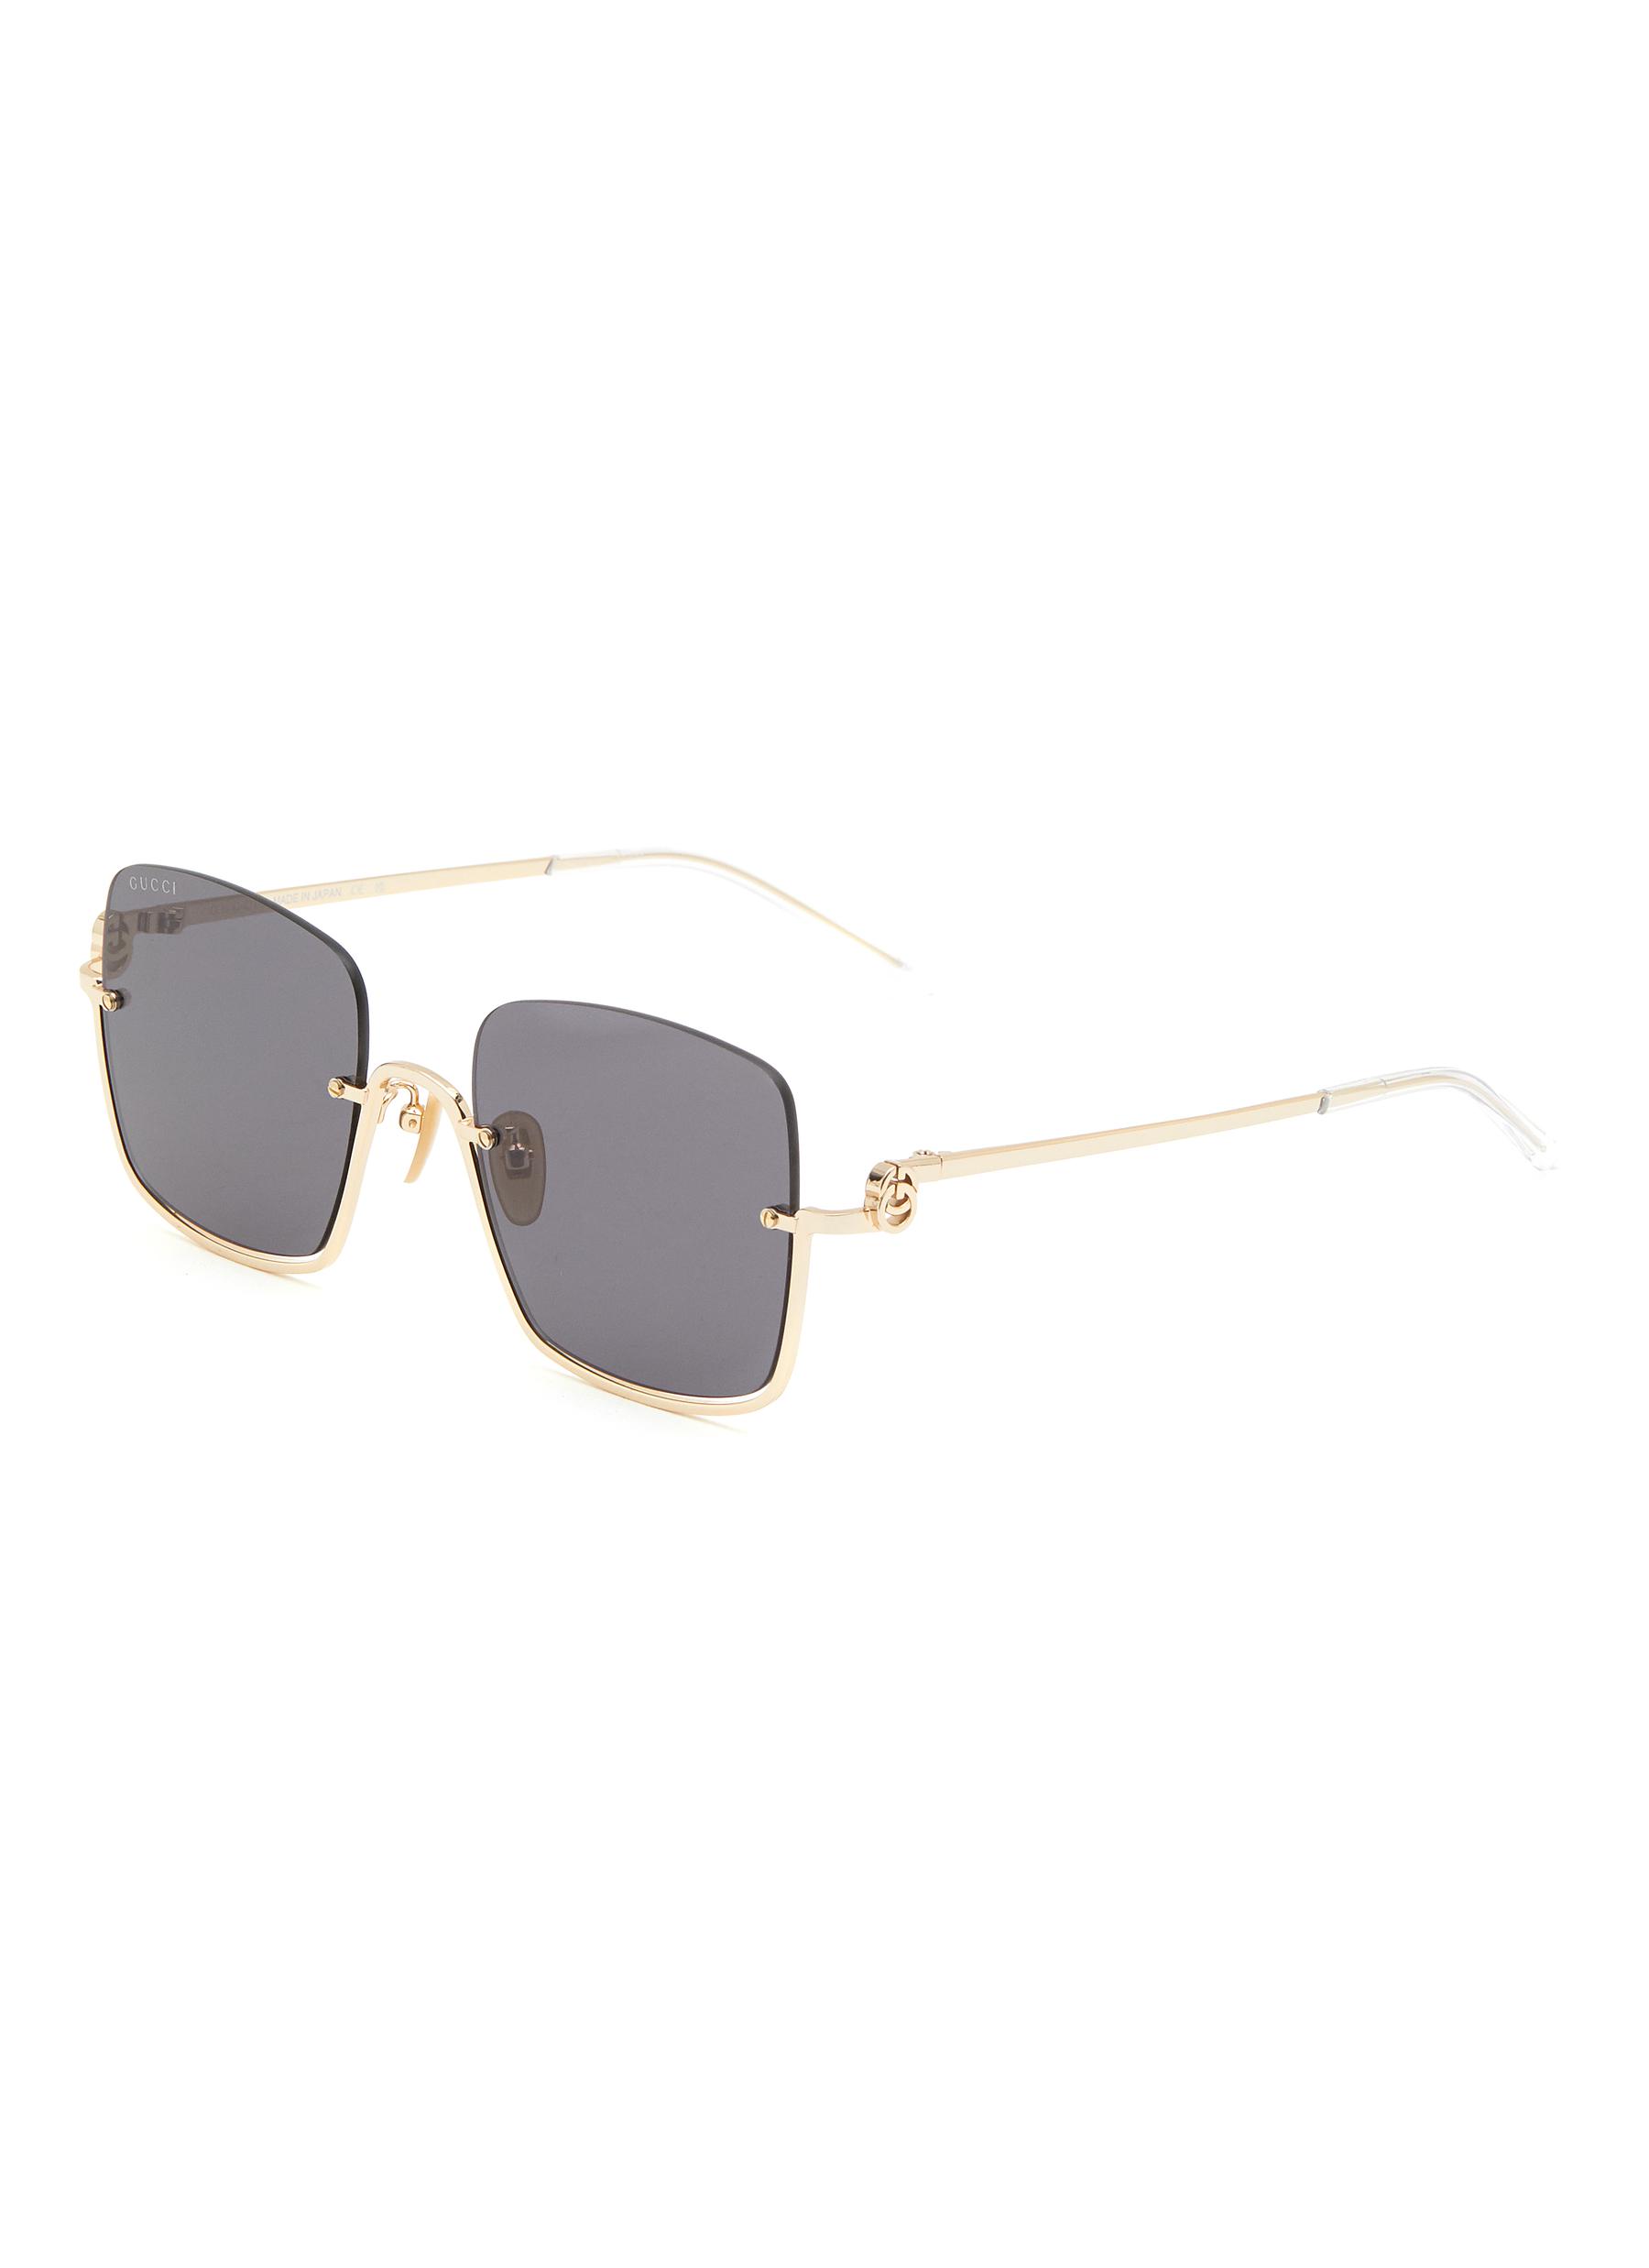 Modern Style Metal T Square Mirror Sunglasses For Men And Women